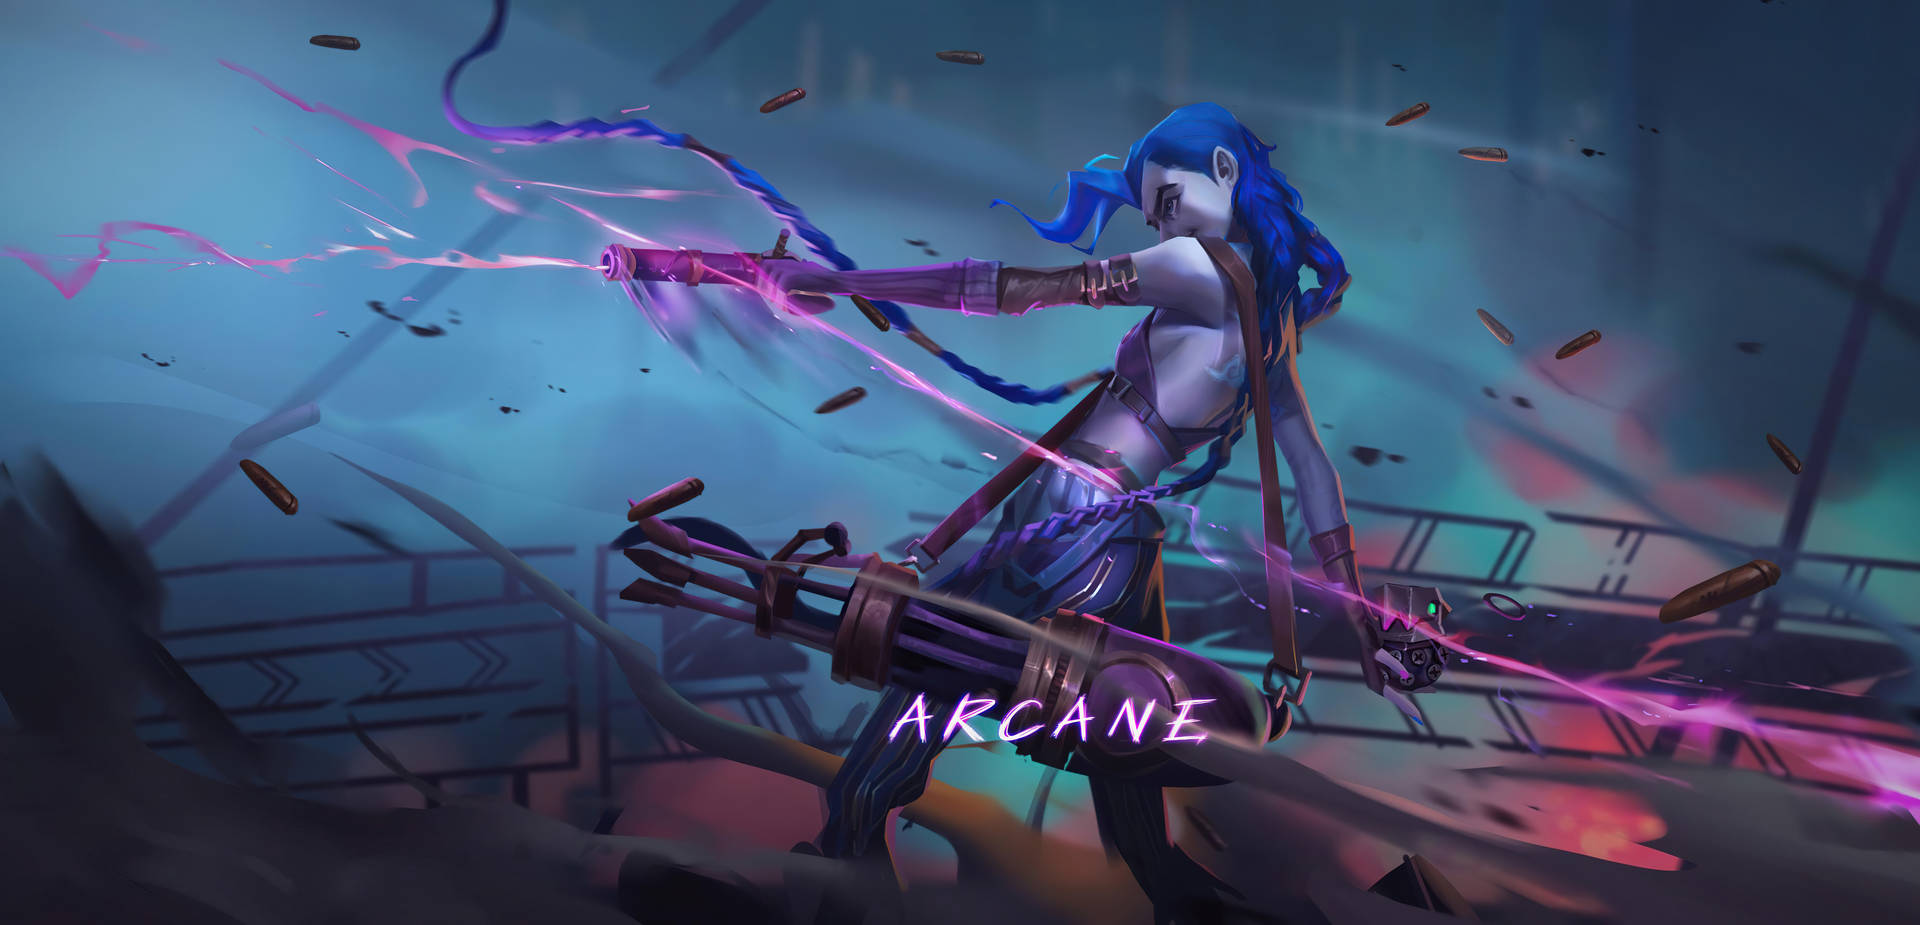 Epic Scene From Arcane: League Of Legends Animations Background